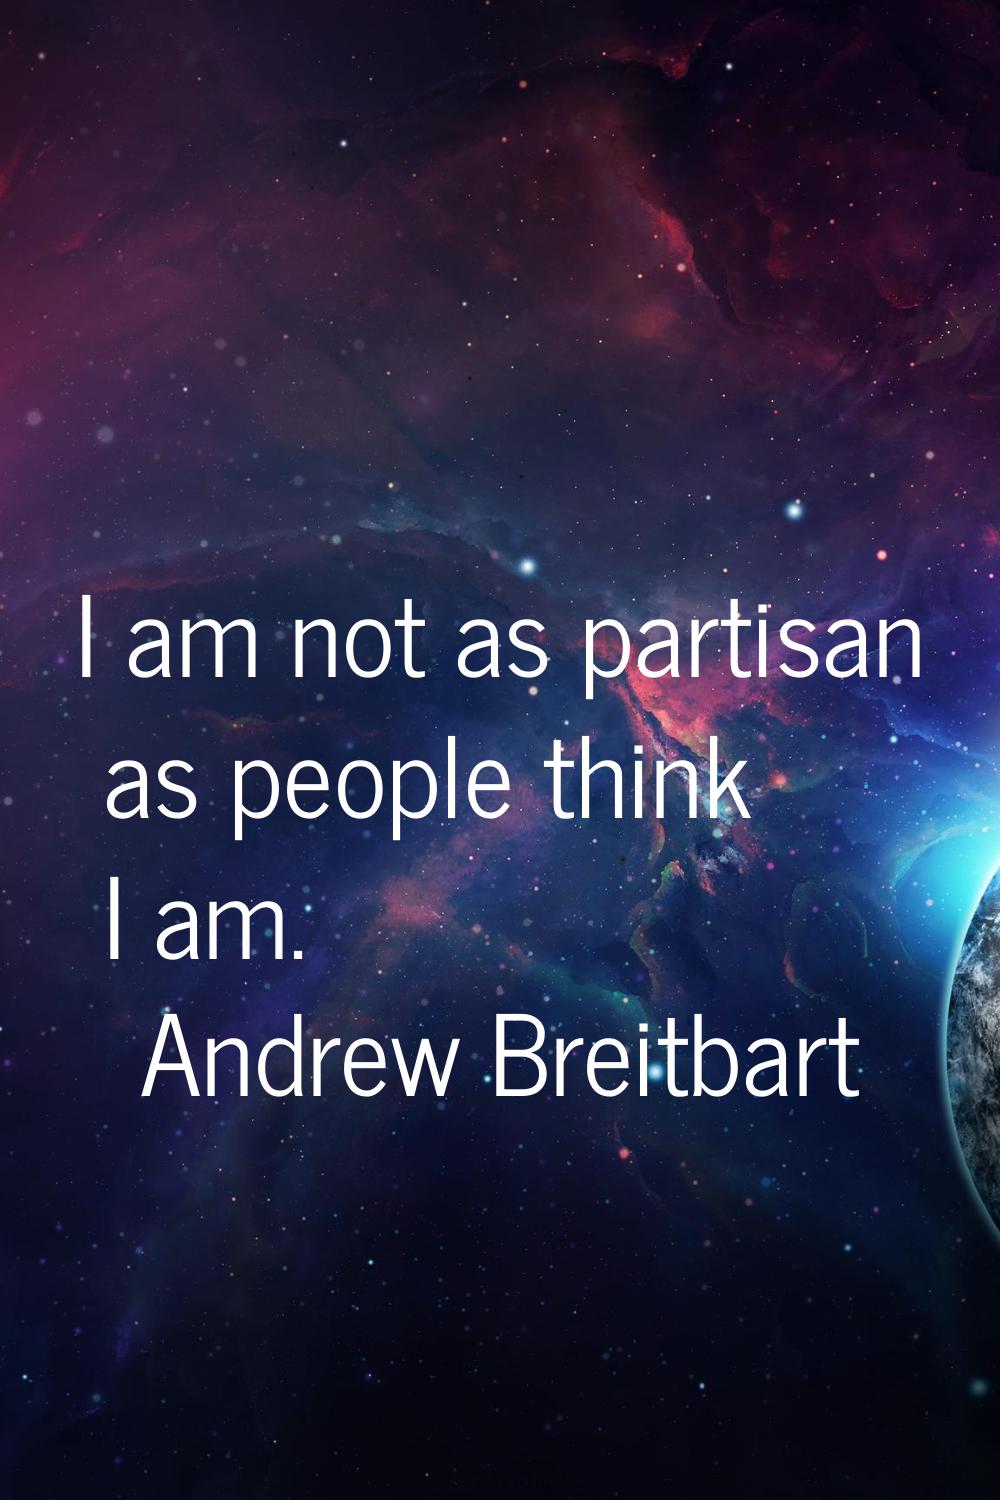 I am not as partisan as people think I am.